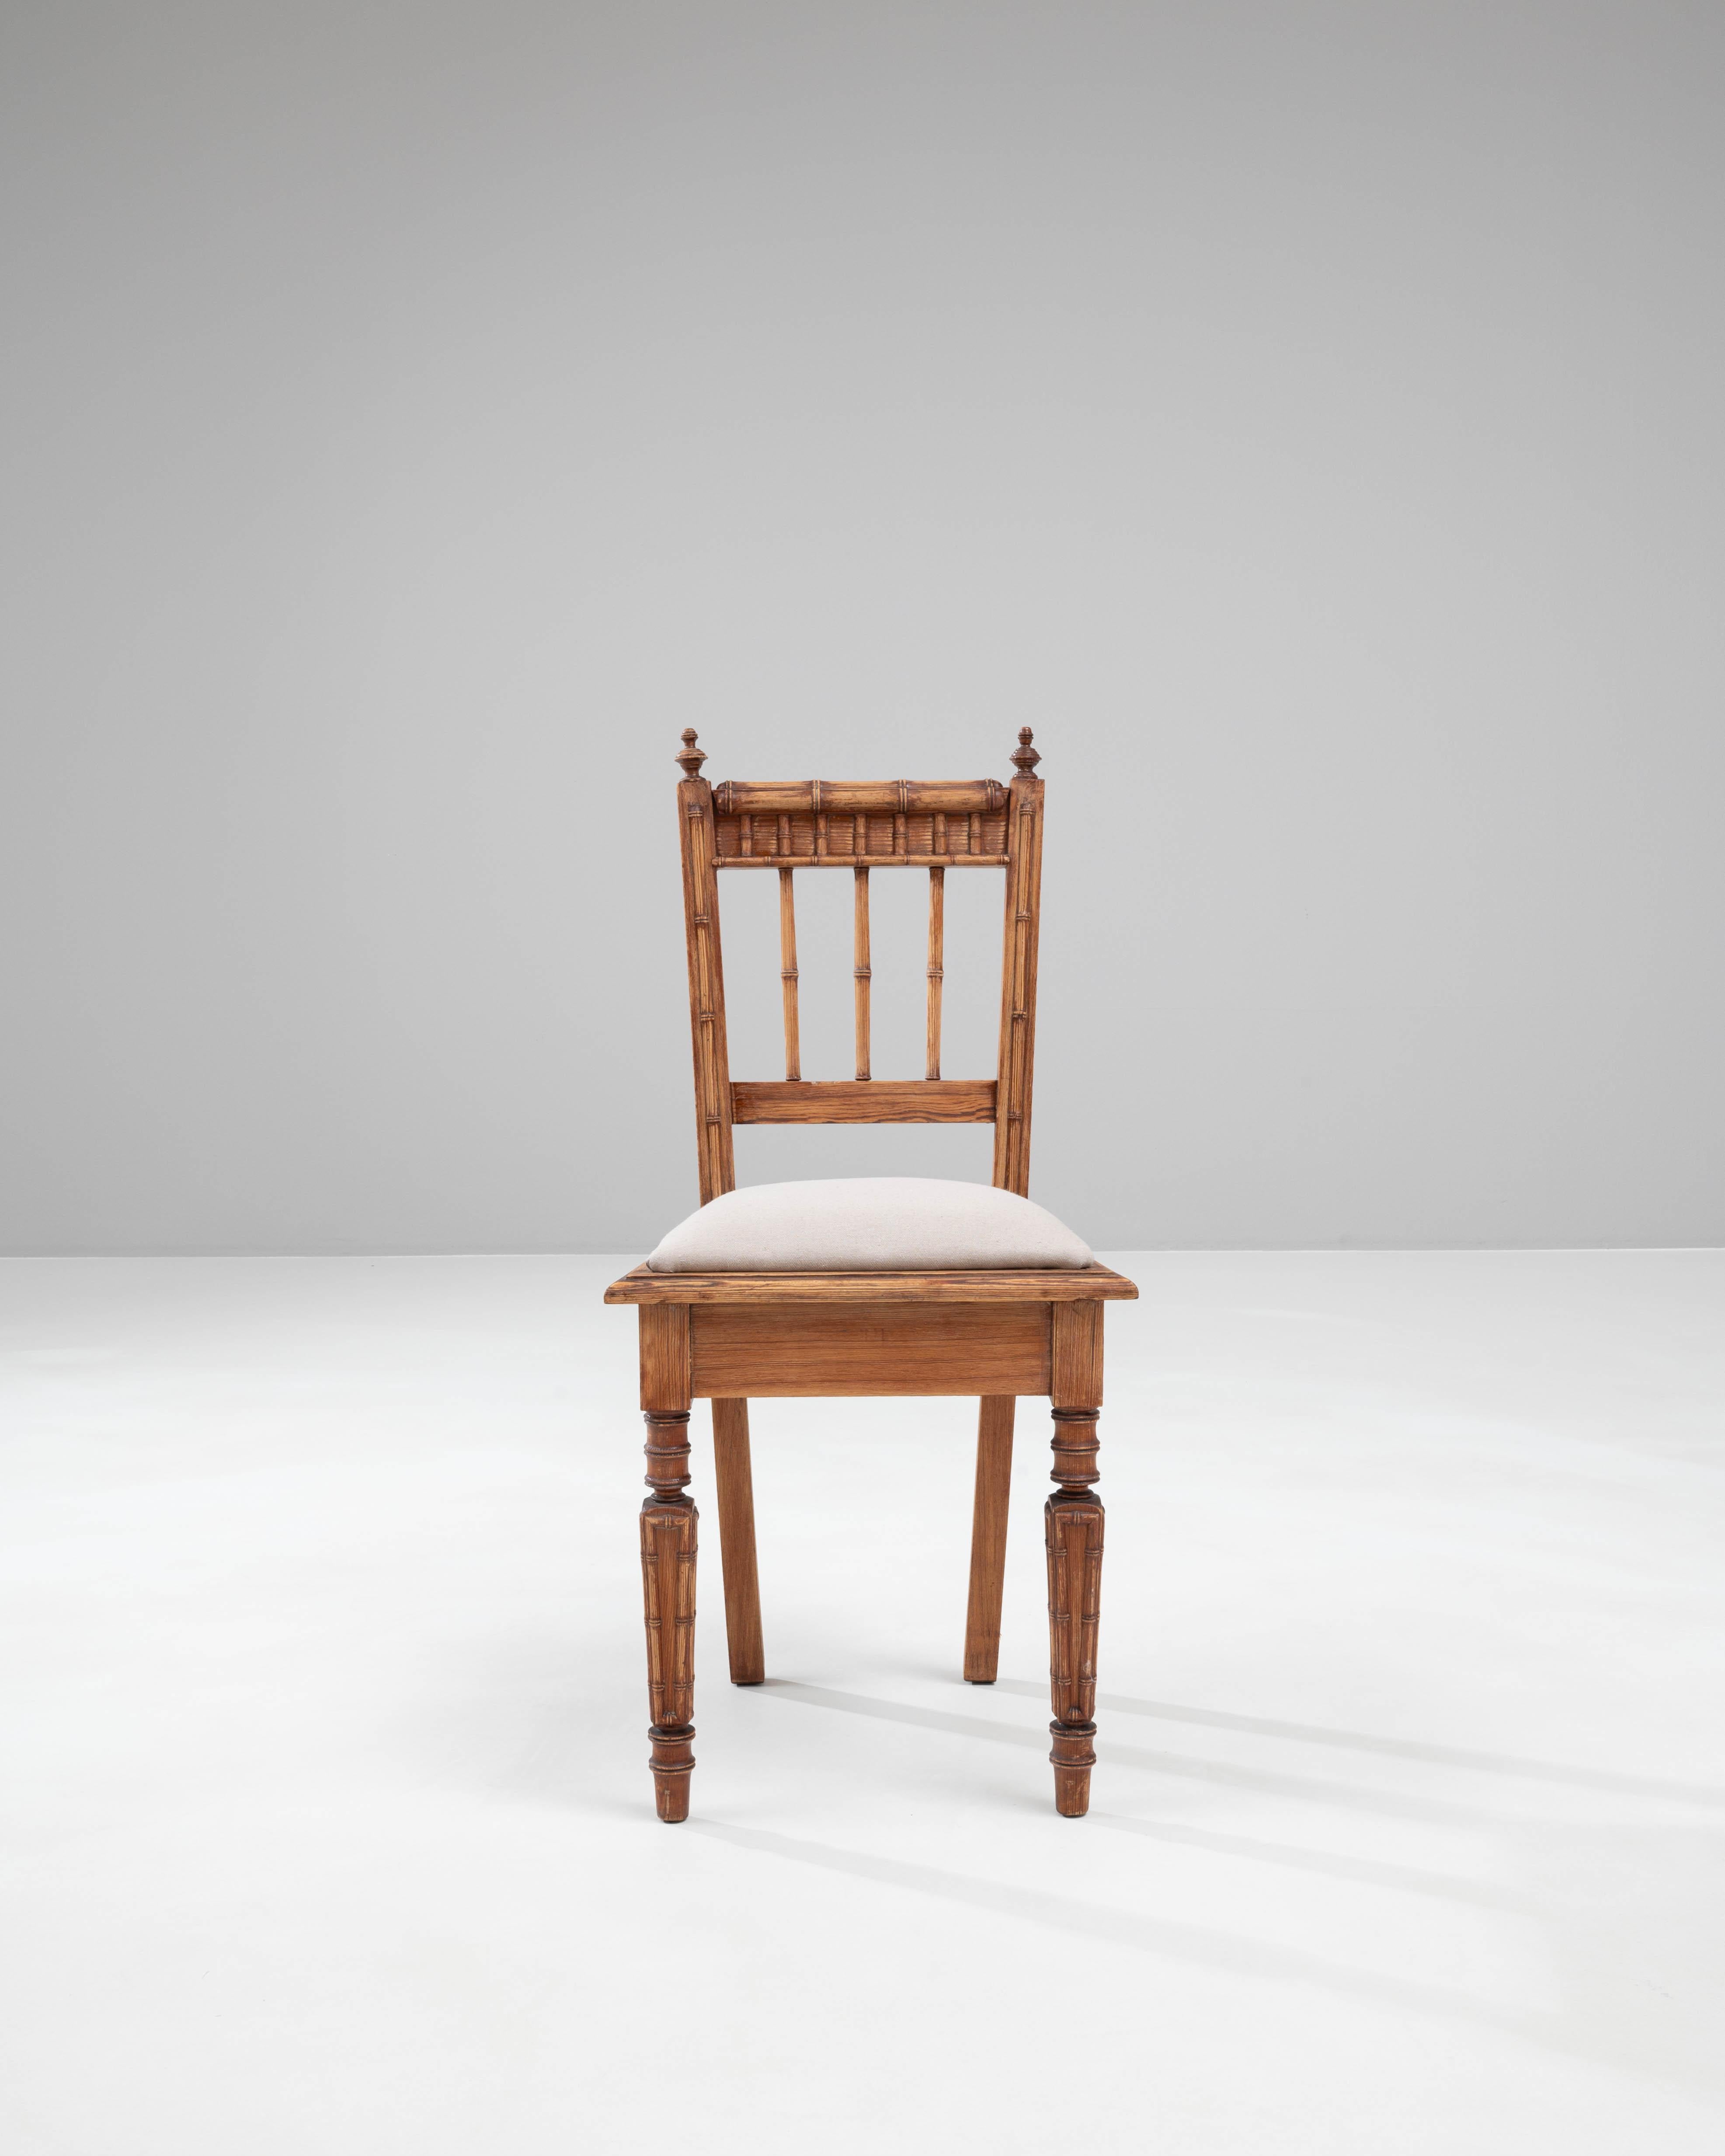 Step back in time with this authentic 19th-century French wooden chair, a piece that perfectly encapsulates the charm and elegance of historical French furniture design. Crafted from rich, durable wood, this chair features intricate detailing,